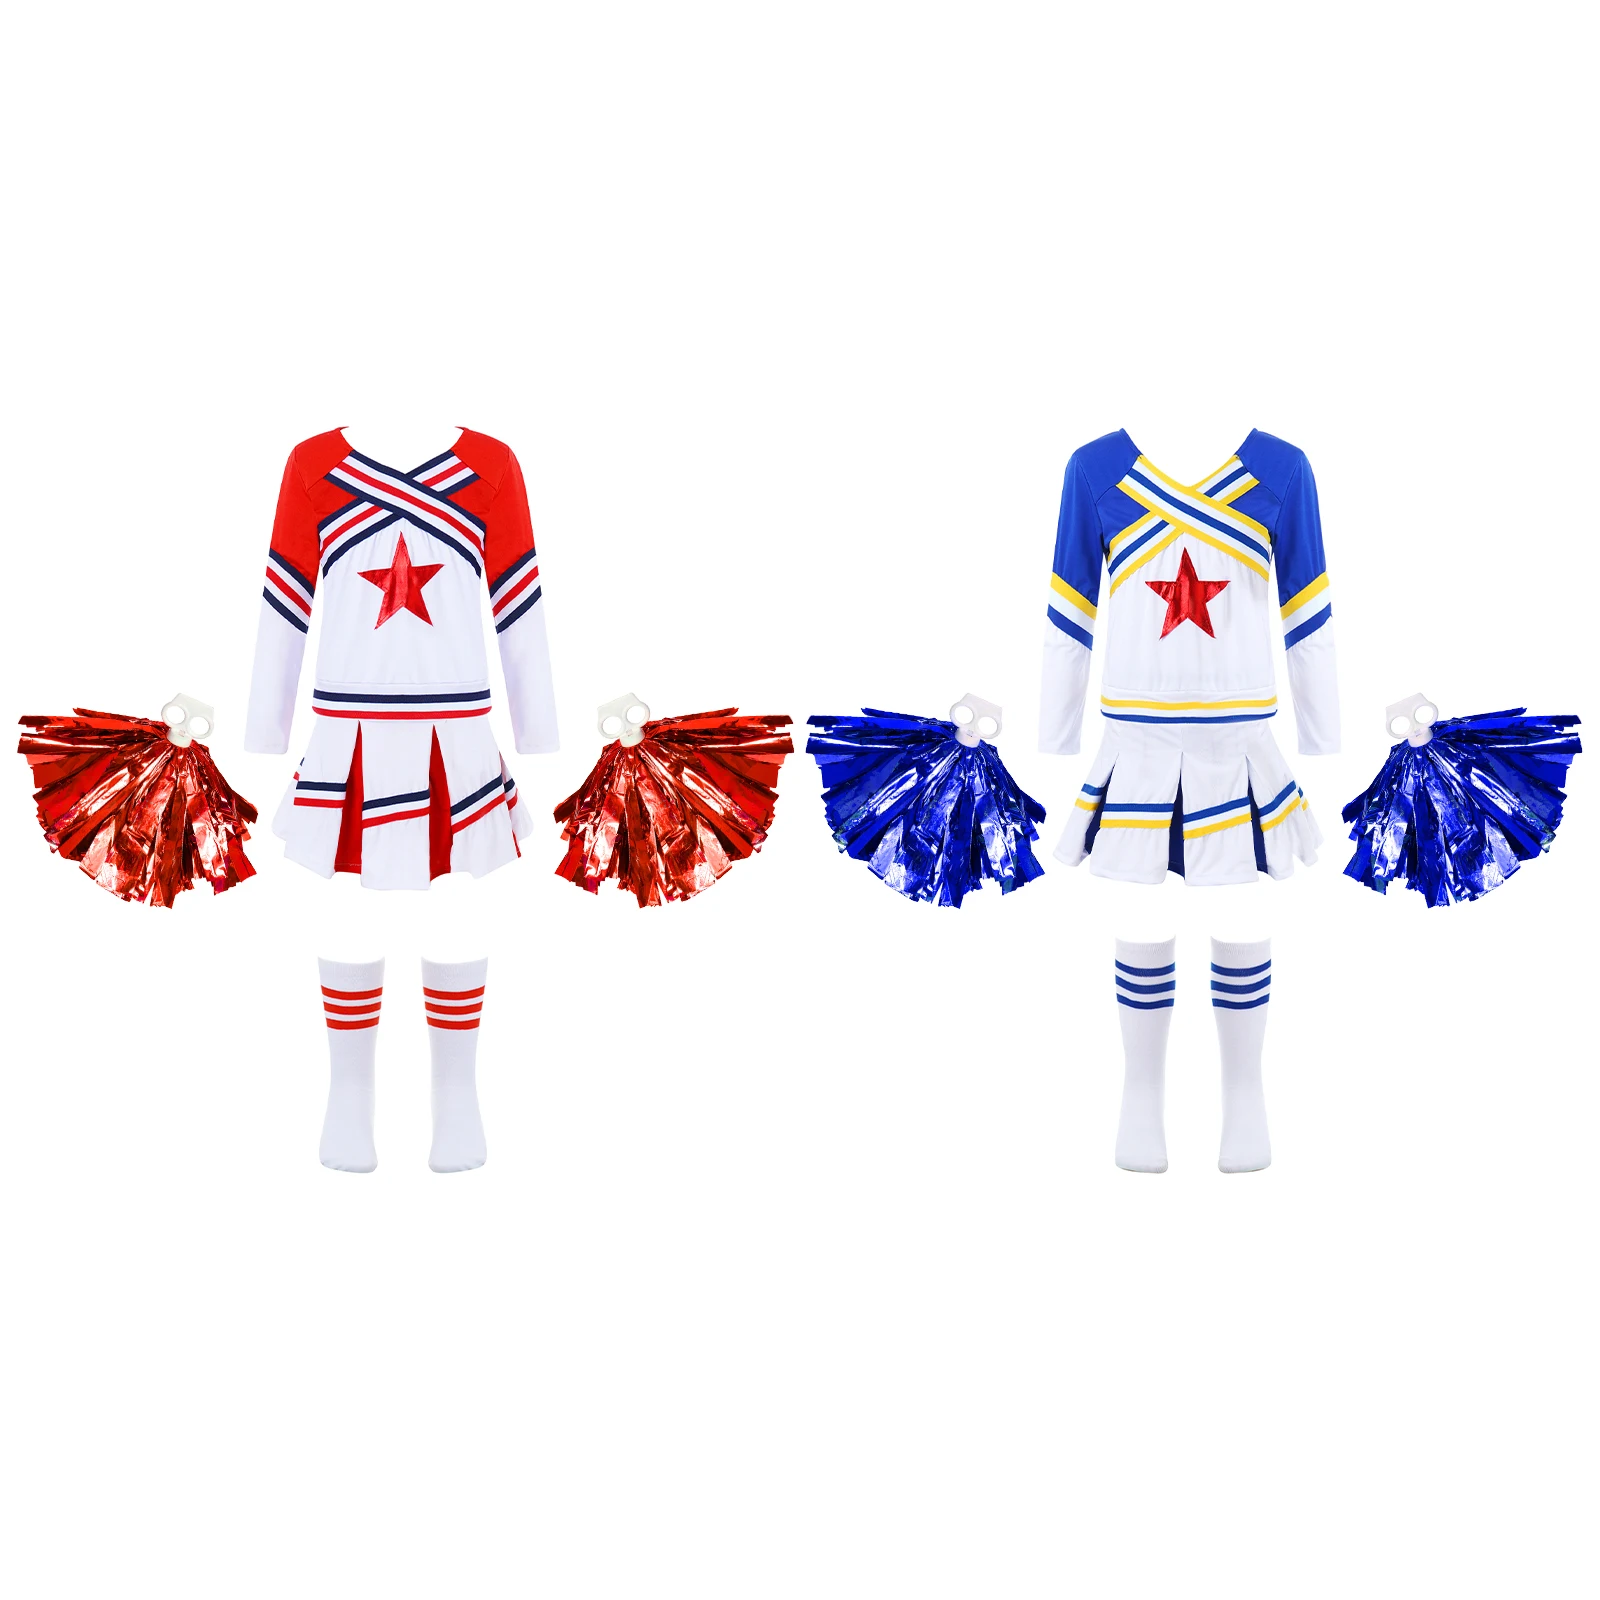 Kids Girls Cheerleading Cheer Dance Competition Costume Long Sleeve Shirt Skirts with Socks And Flower Balls Dancing Cosplay Set